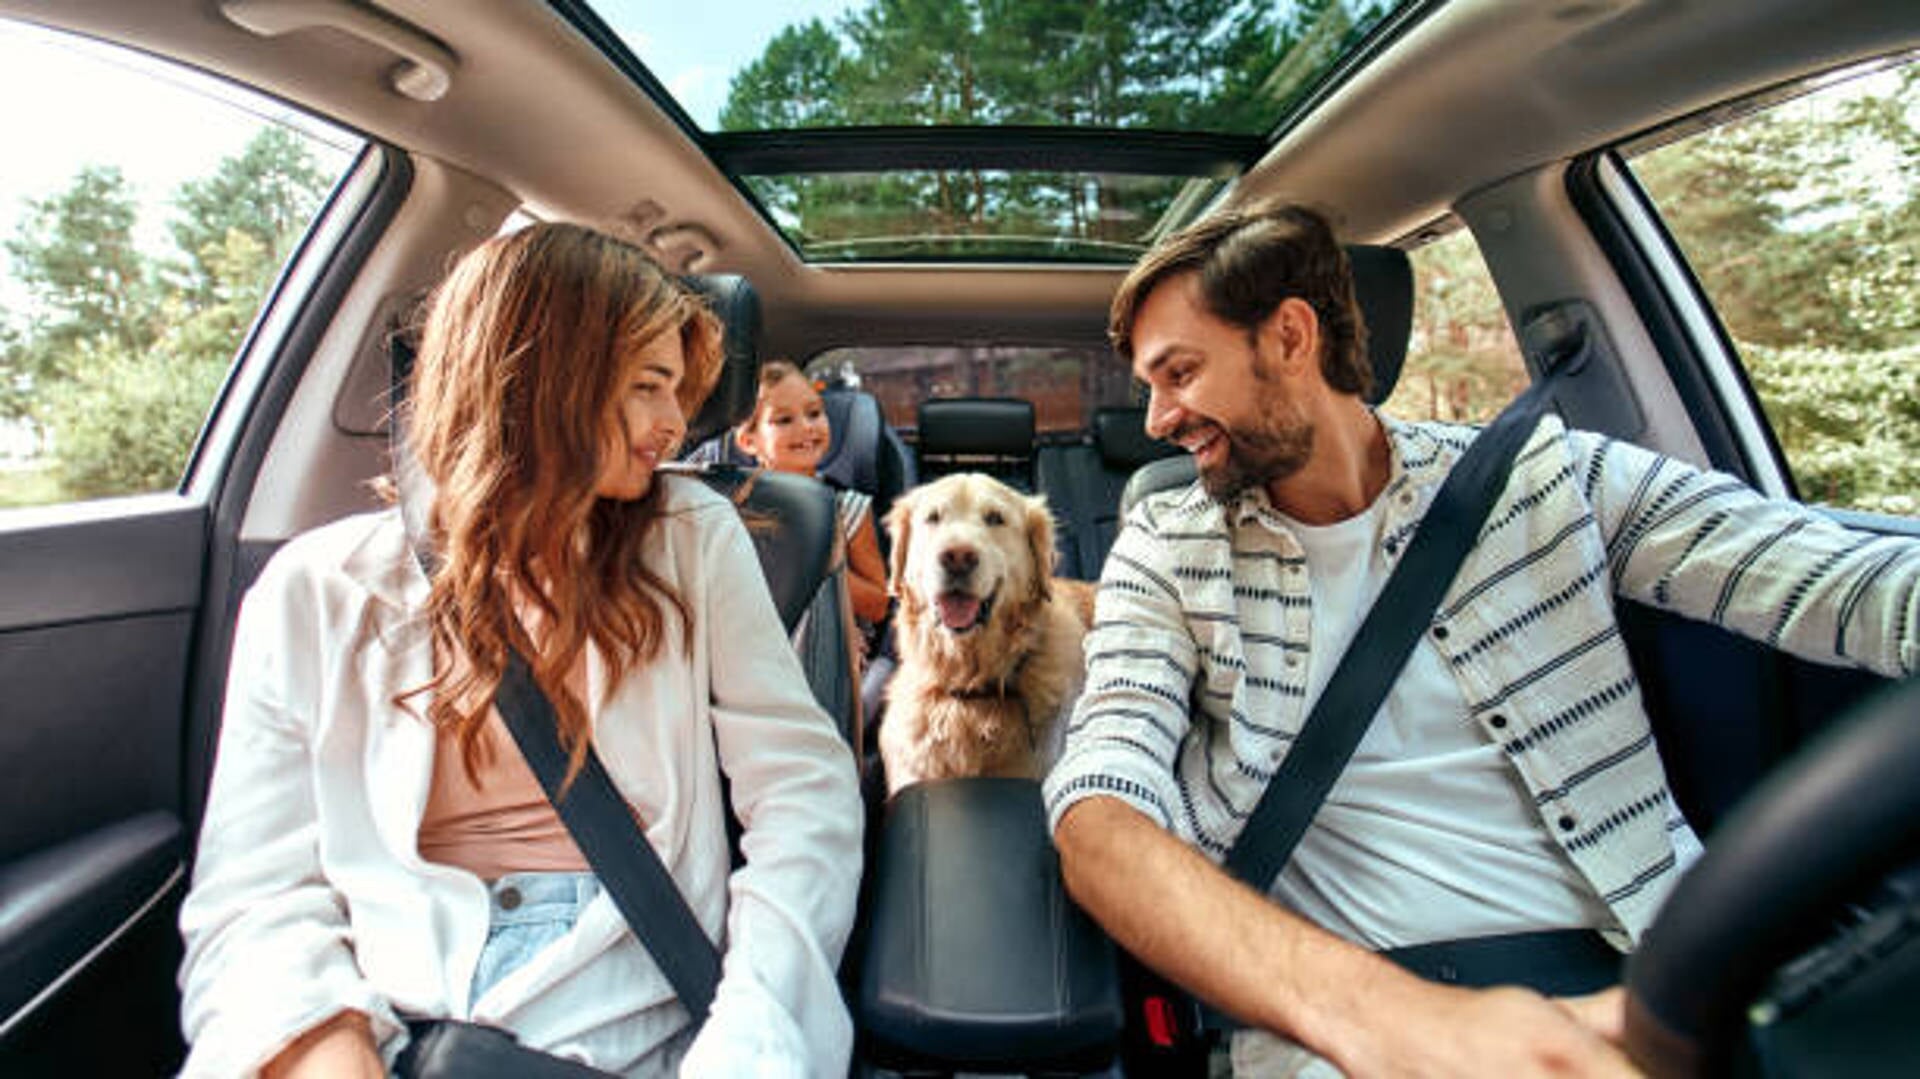 The whole family is driving for the weekend. Mom and Dad with their daughter and a Labrador dog are sitting in the car. Leisure, travel, tourism.